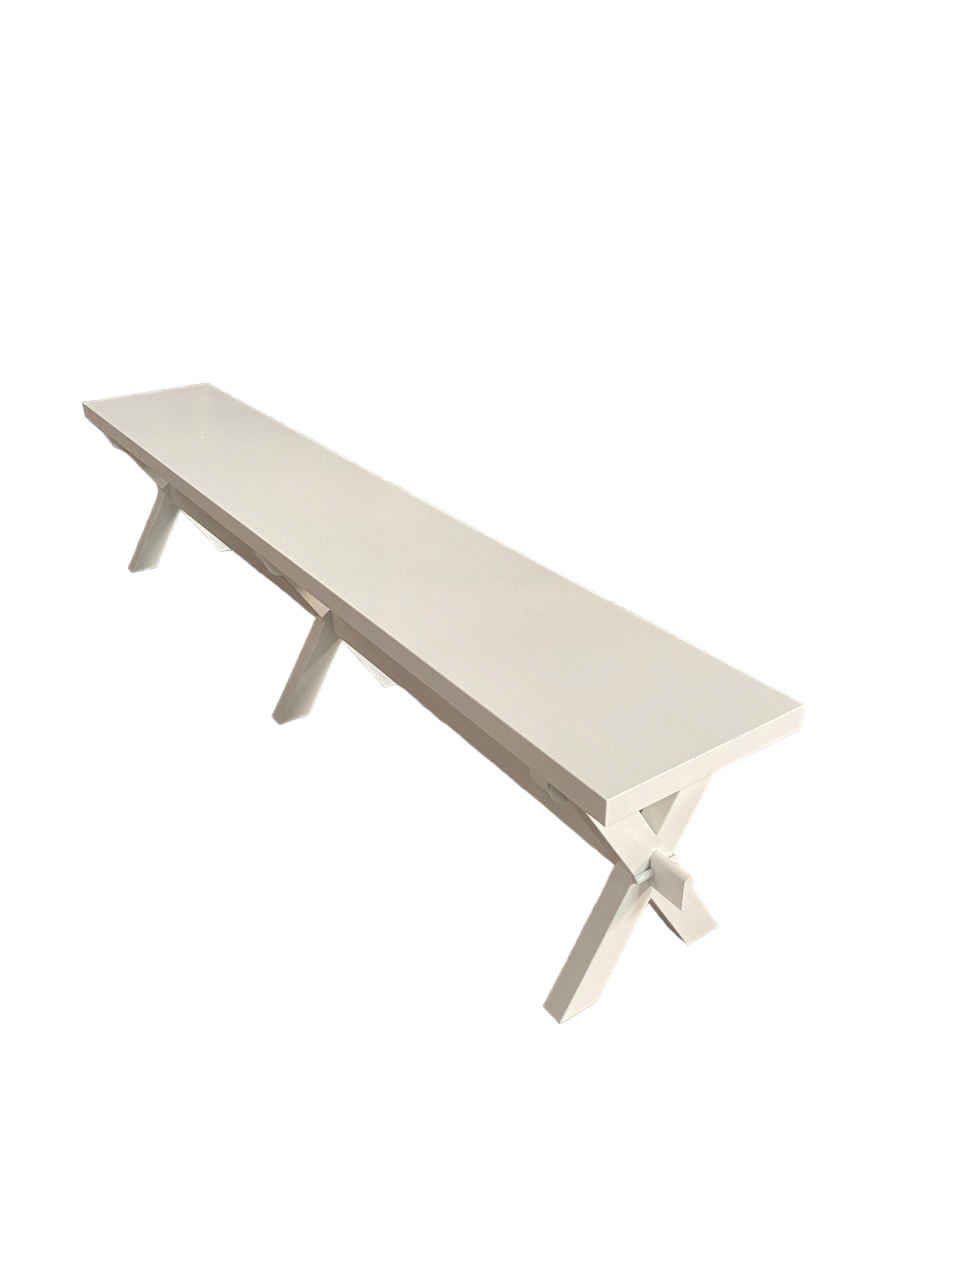 Wedding Benches For hire <a href='#' class='view-taggged-products' data-id=7851>Click to View Products</a><div class='taggged-products-slider-wrap'><div class='heading-tag-products'></div><div class='taggged-products-slider'></div></div><div class='loading-spinner'><i class='fa fa-spinner fa-spin'></i></div>